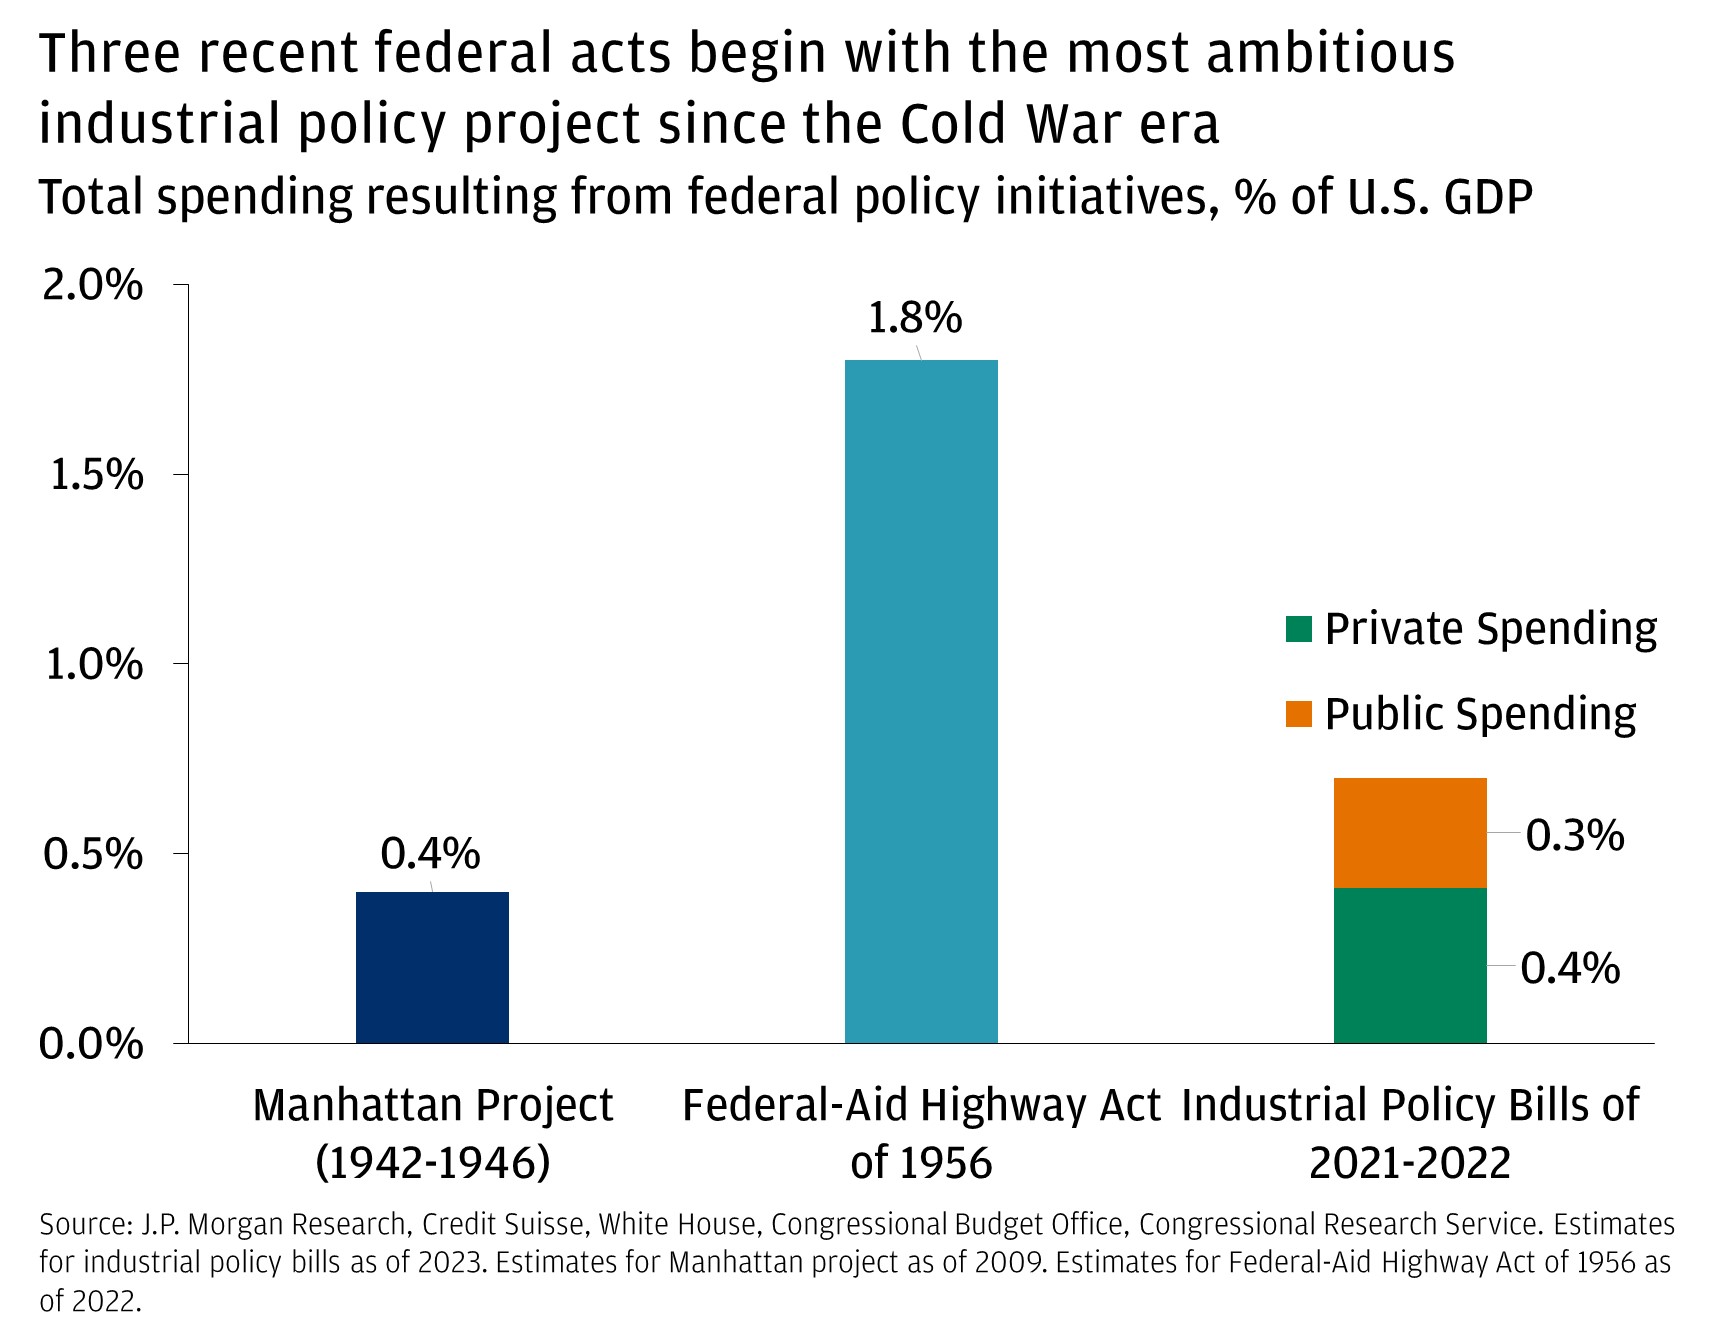 The chart describes total spending resulting from federal policy initiatives as % of GDP. 